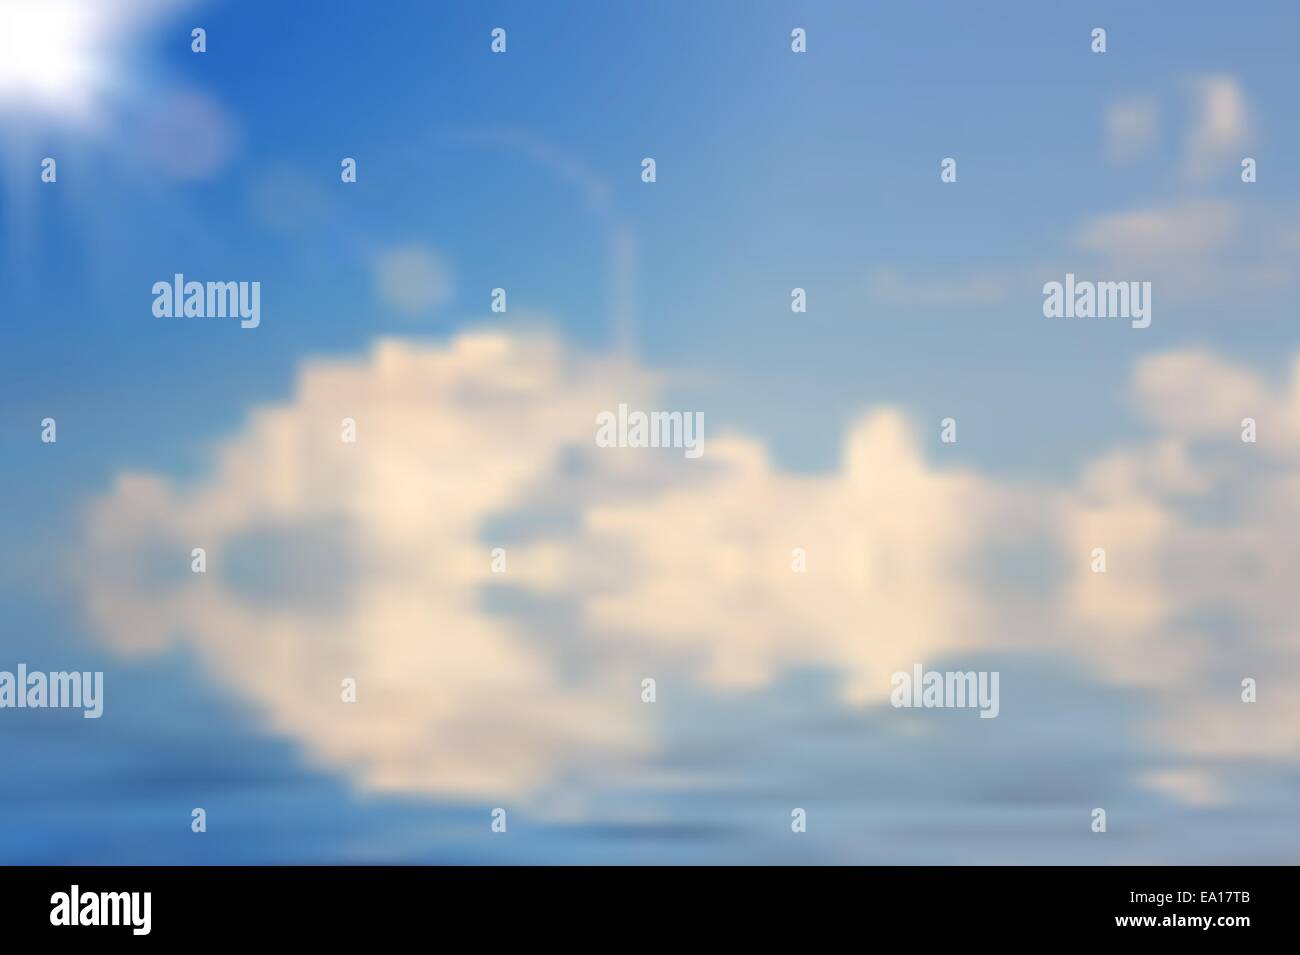 Abstract  cloudy sky and sea design Stock Photo